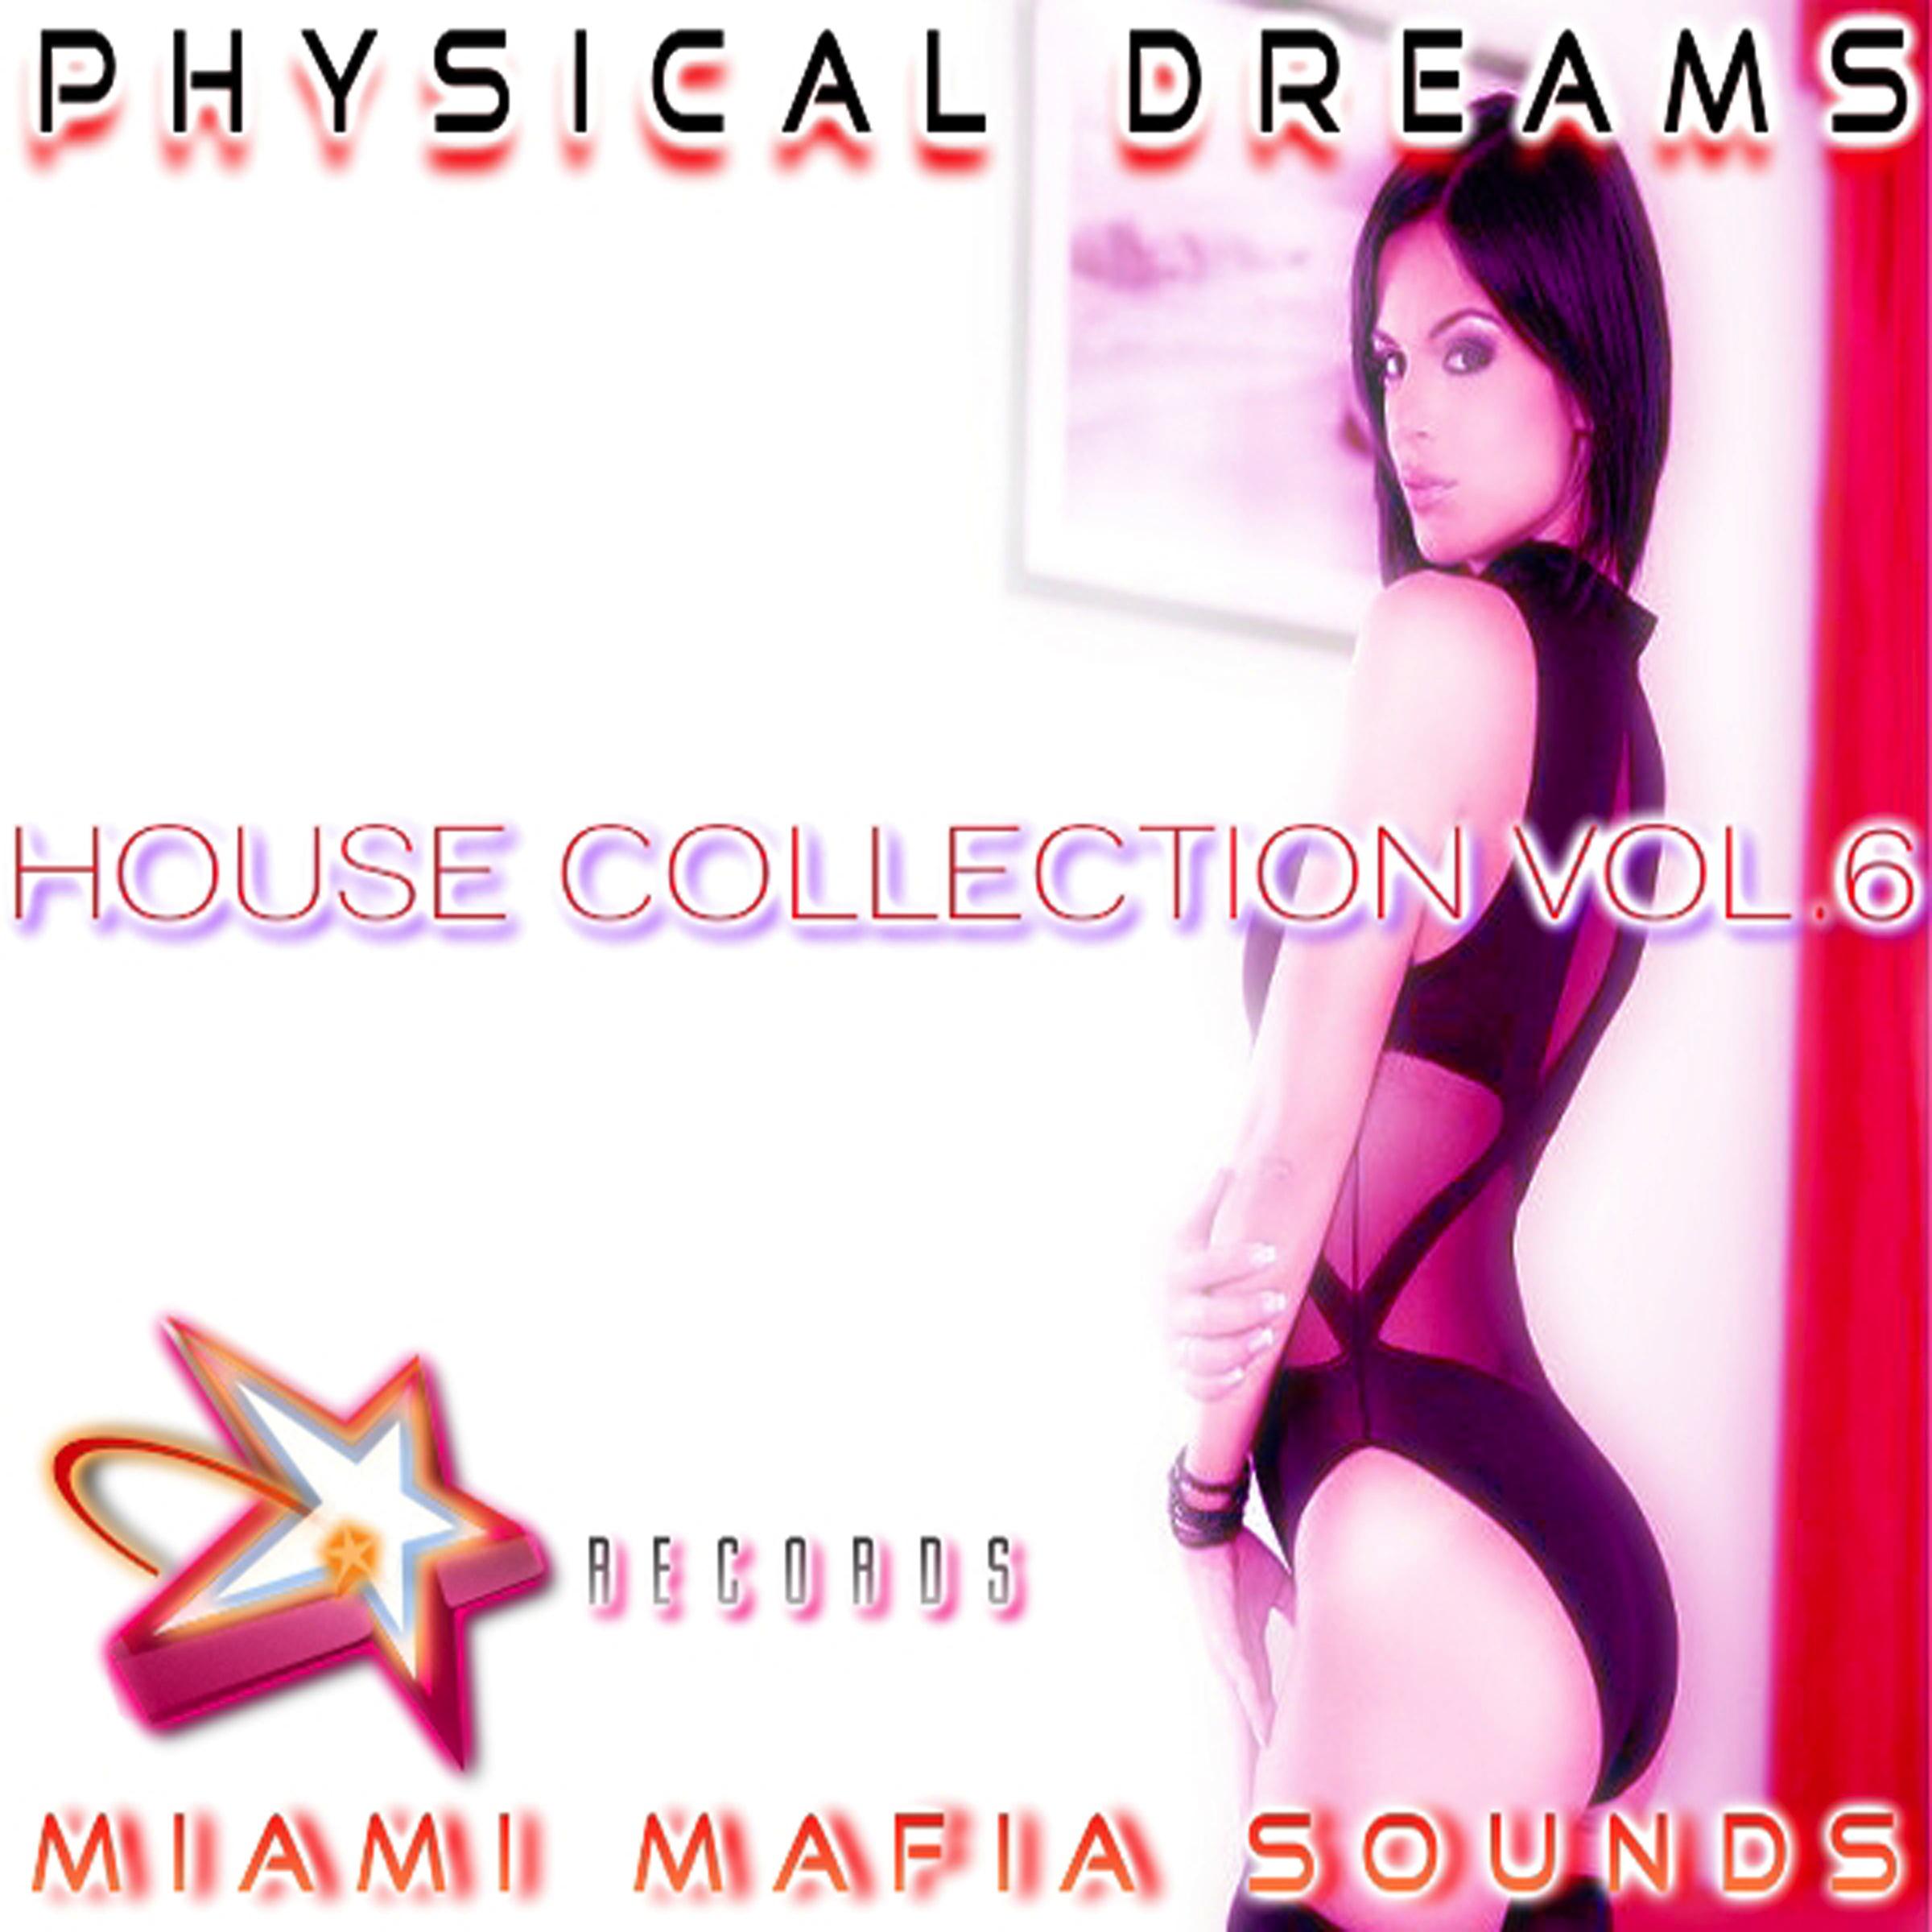 Physical Dreams House Collection, Vol. 6